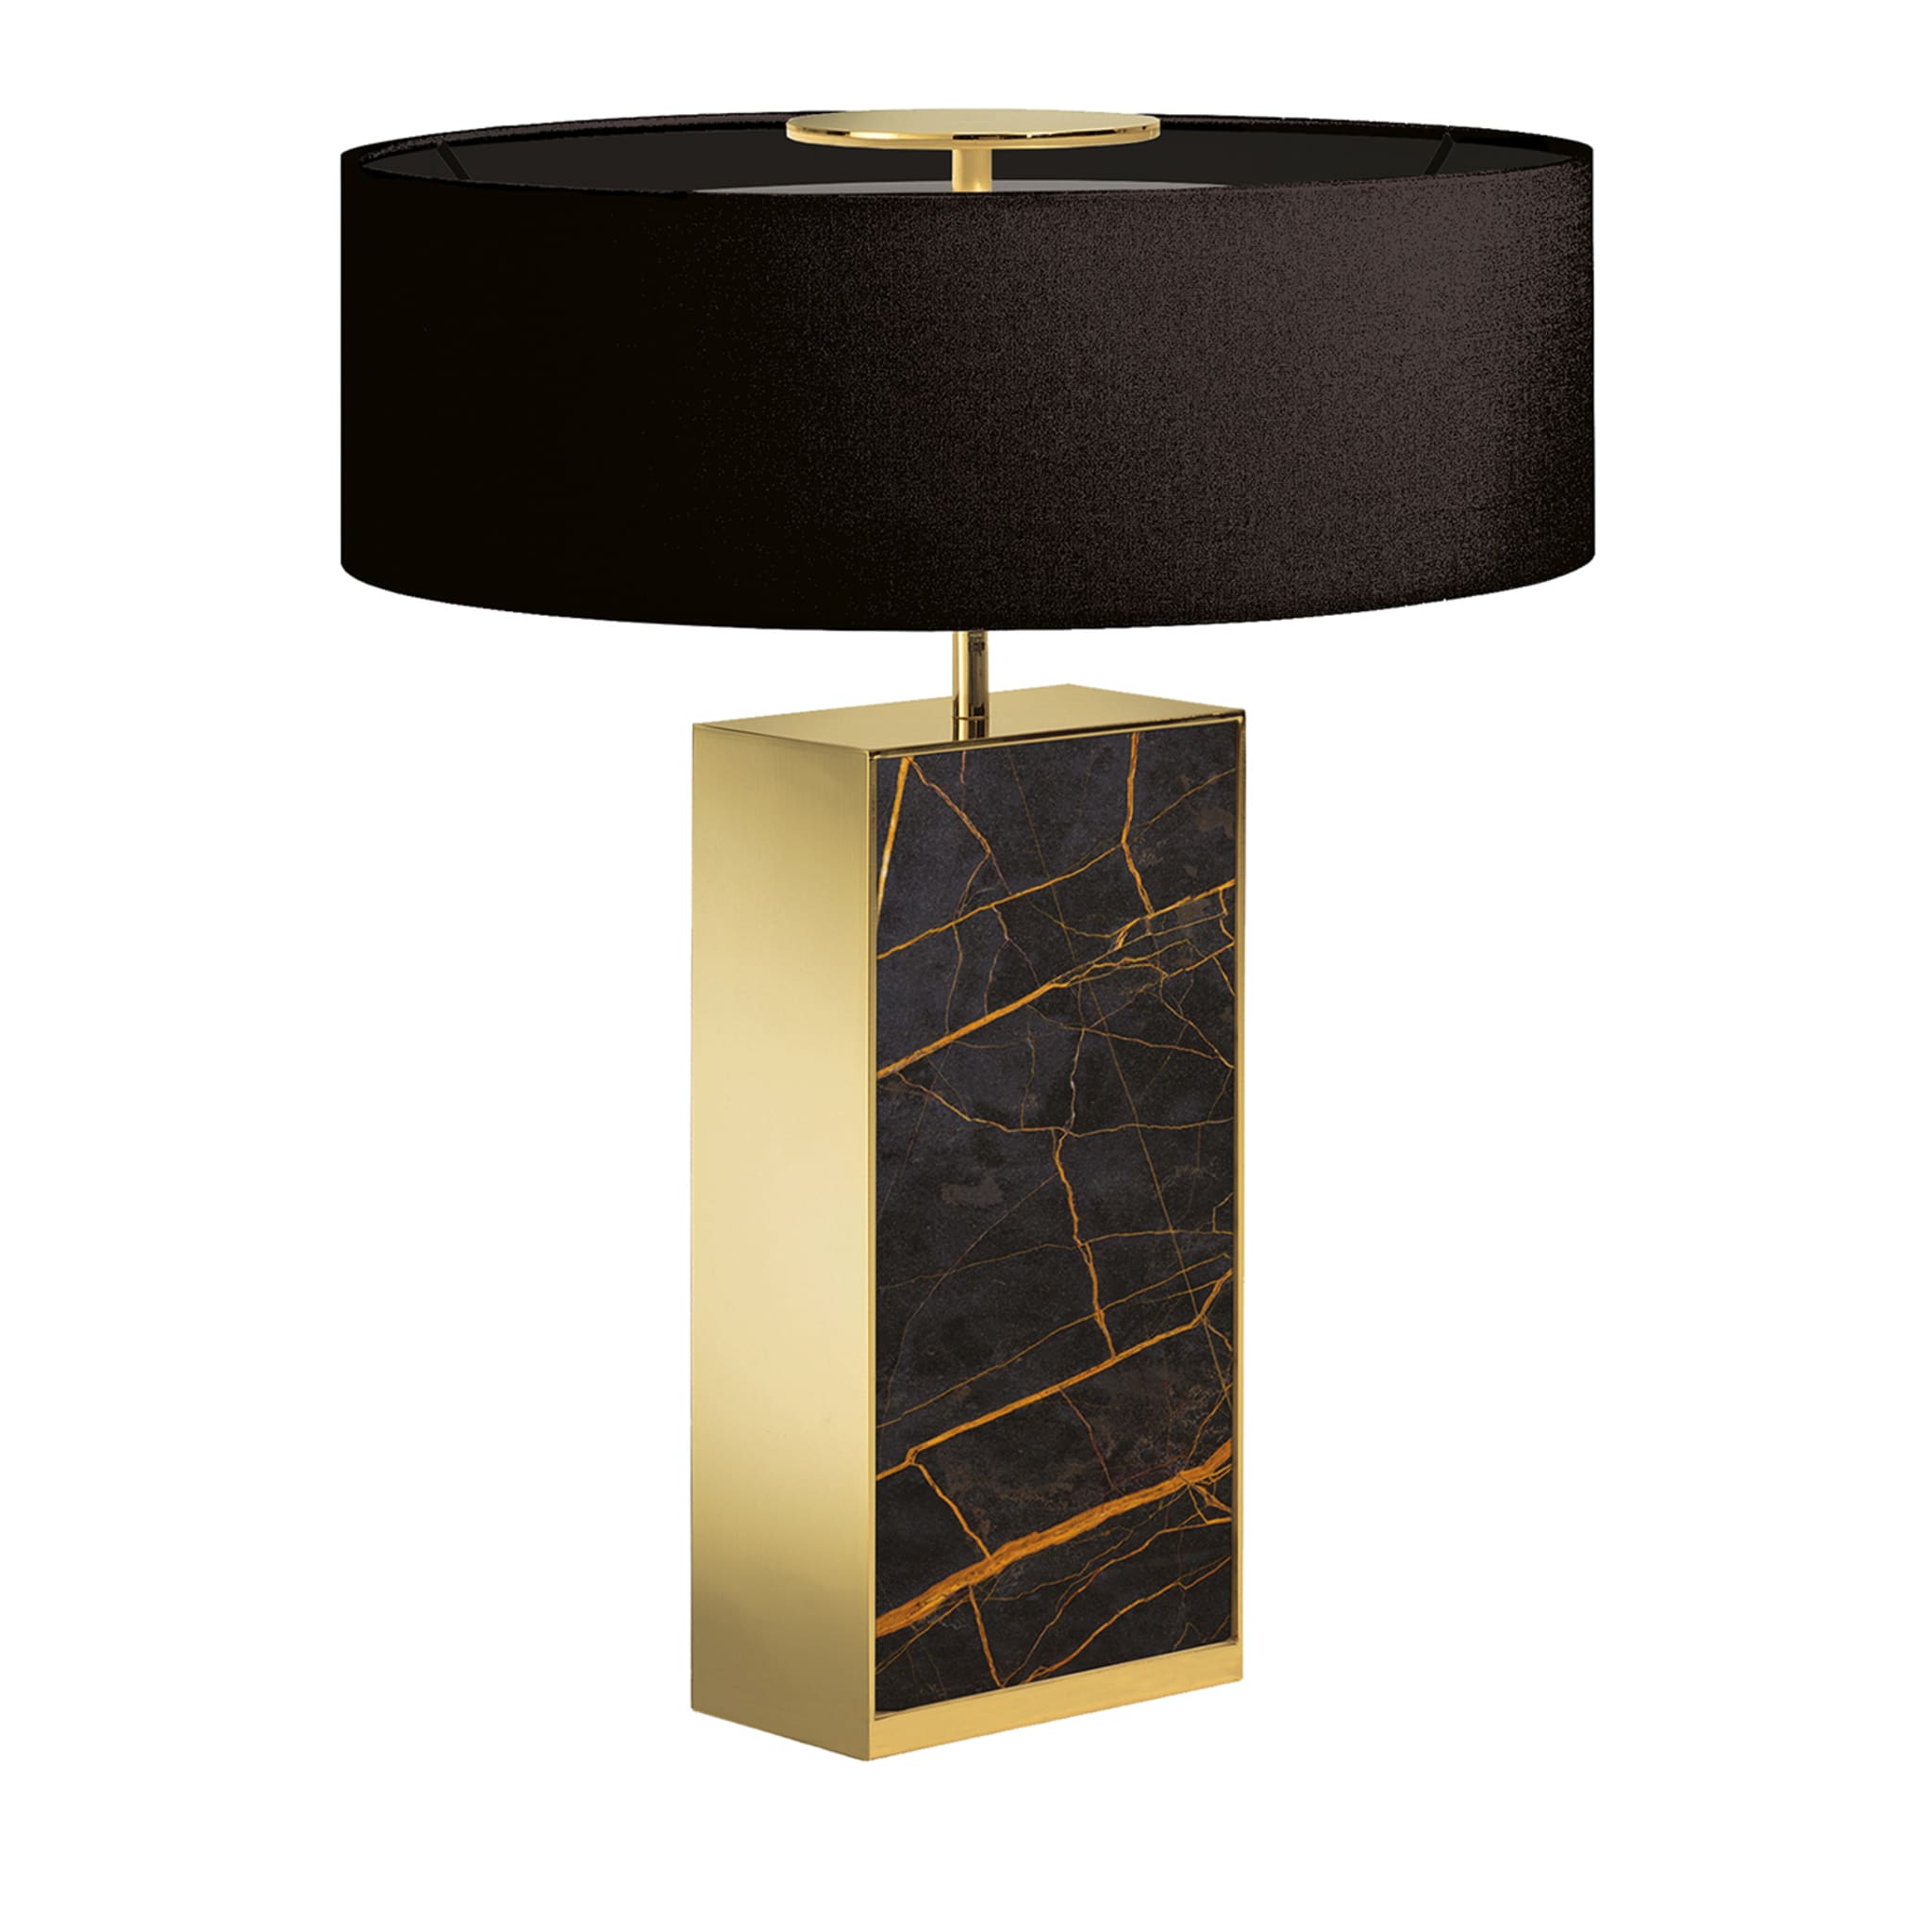 Thelma Couture Table Lamp - Alternative view 1